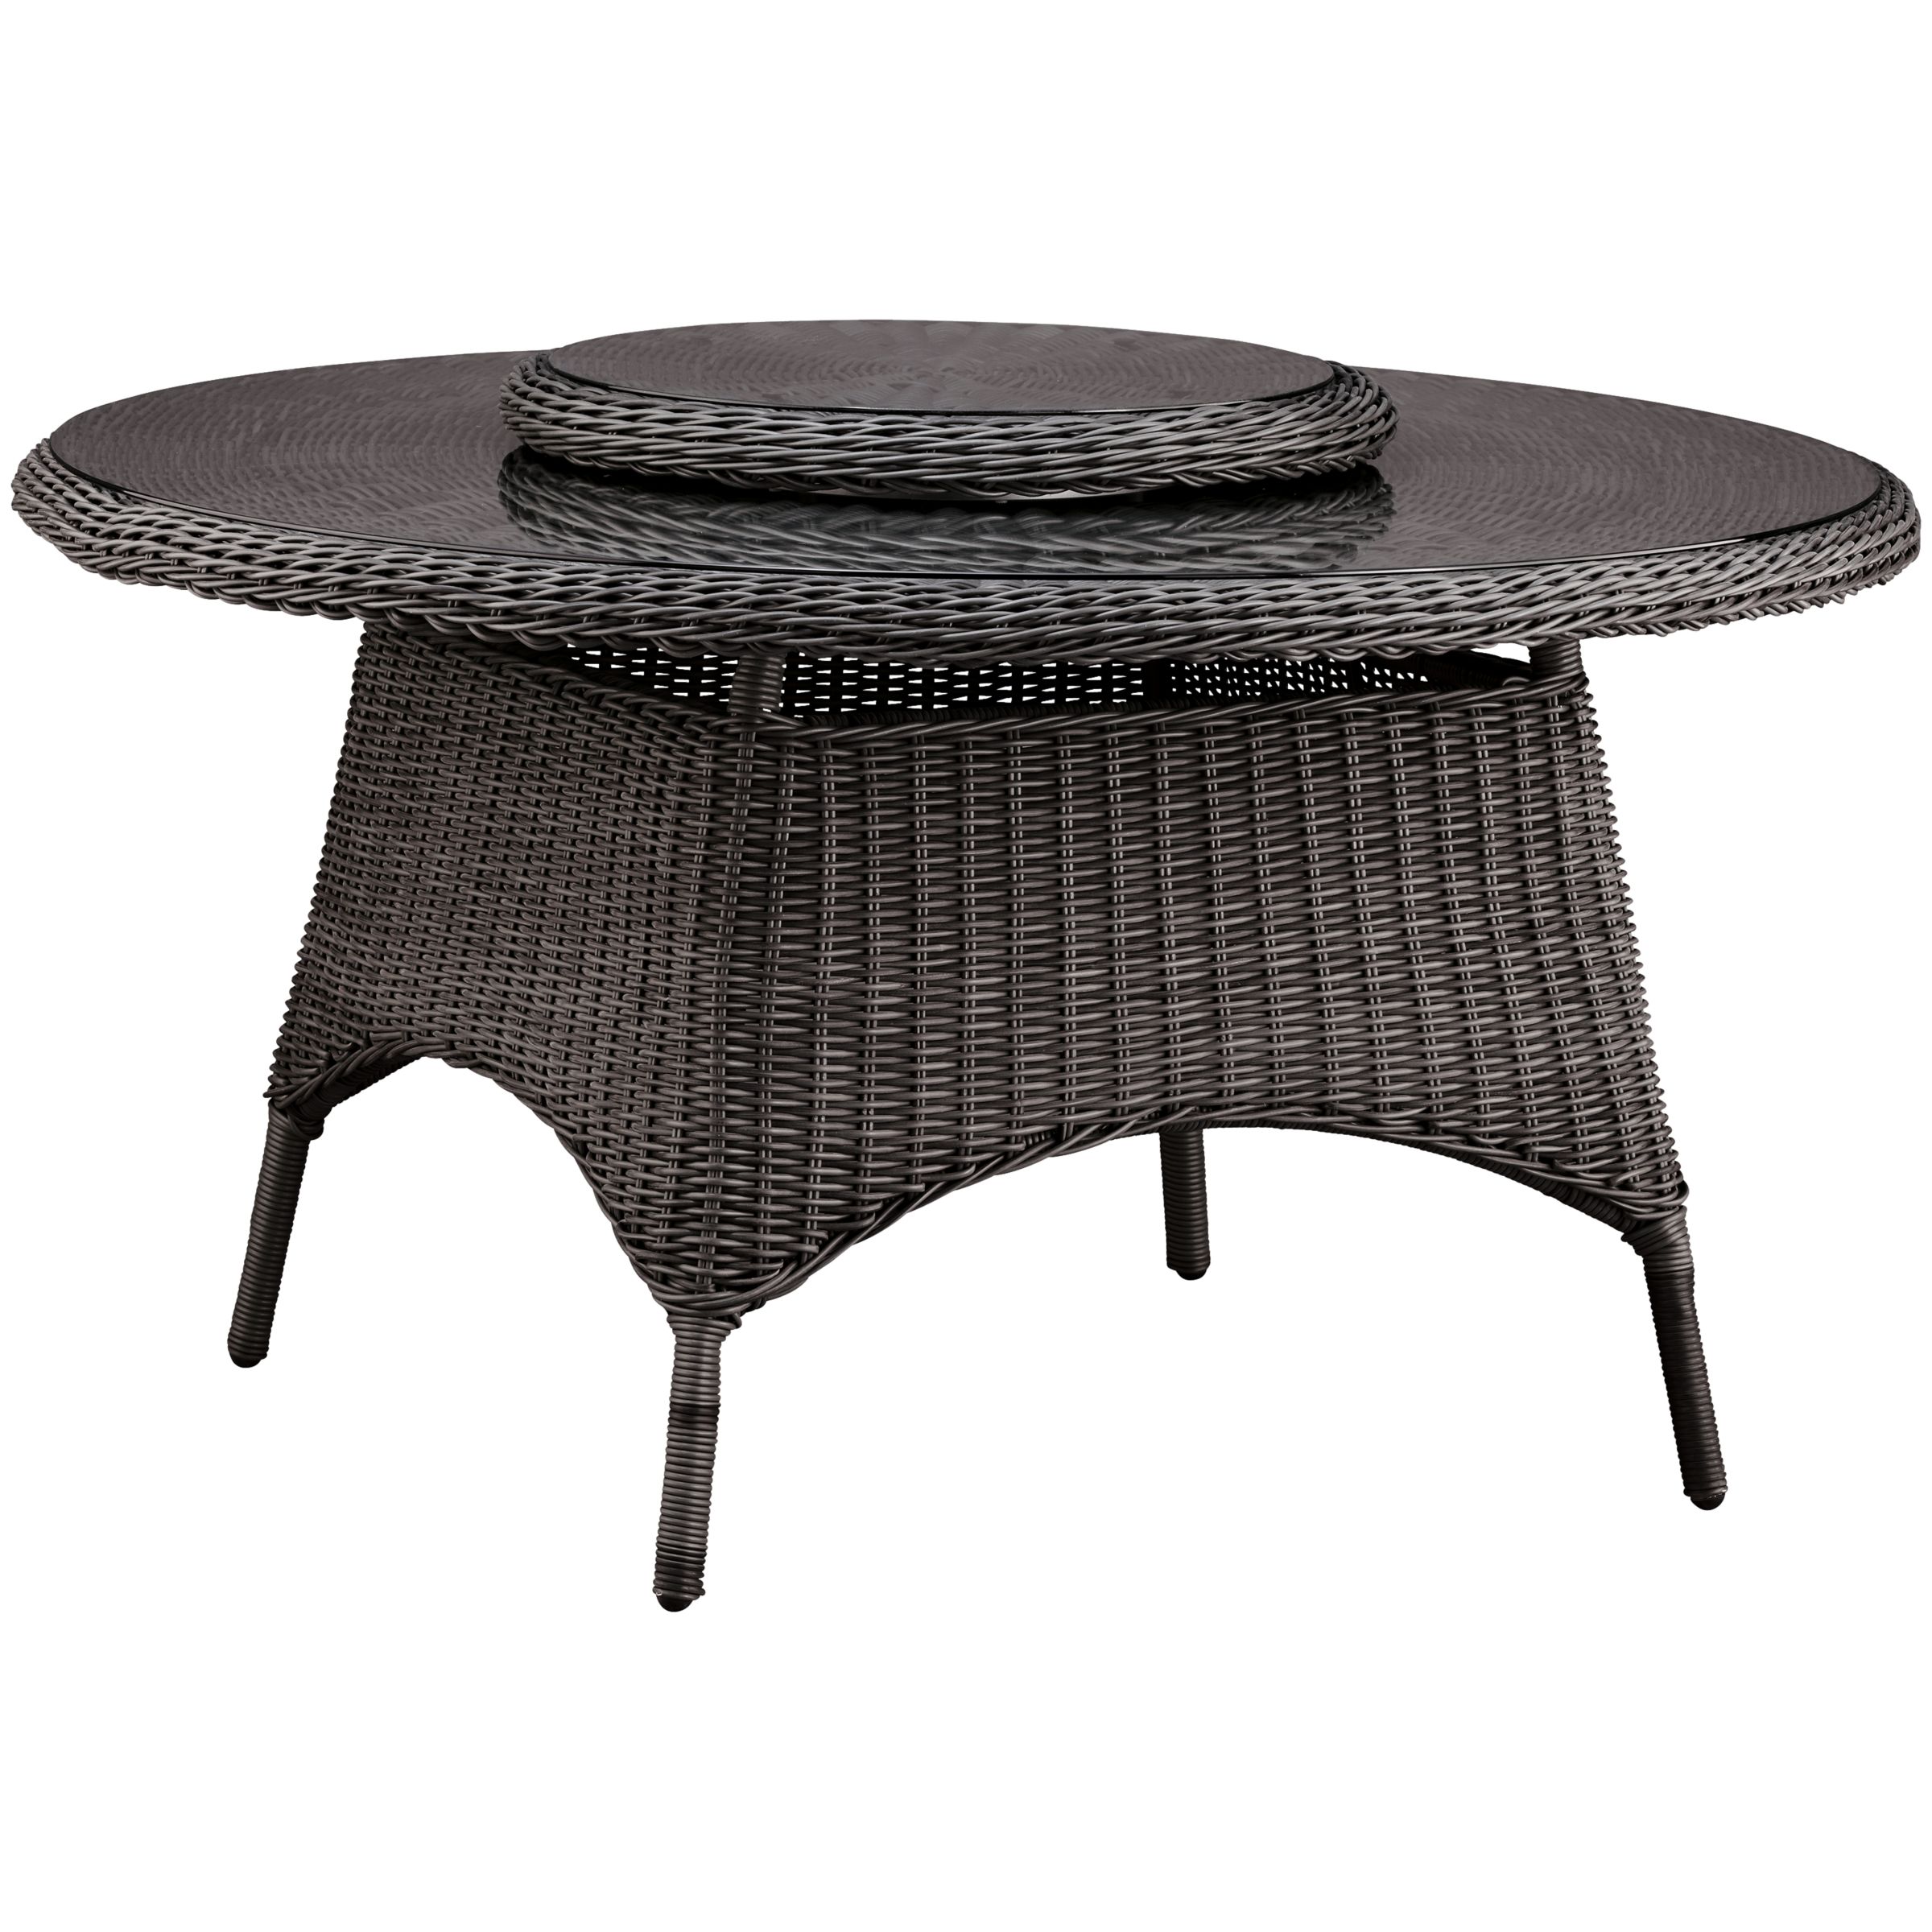 Kettler Round 6 Seater Outdoor Dining Table, Anthracite, width 144cm